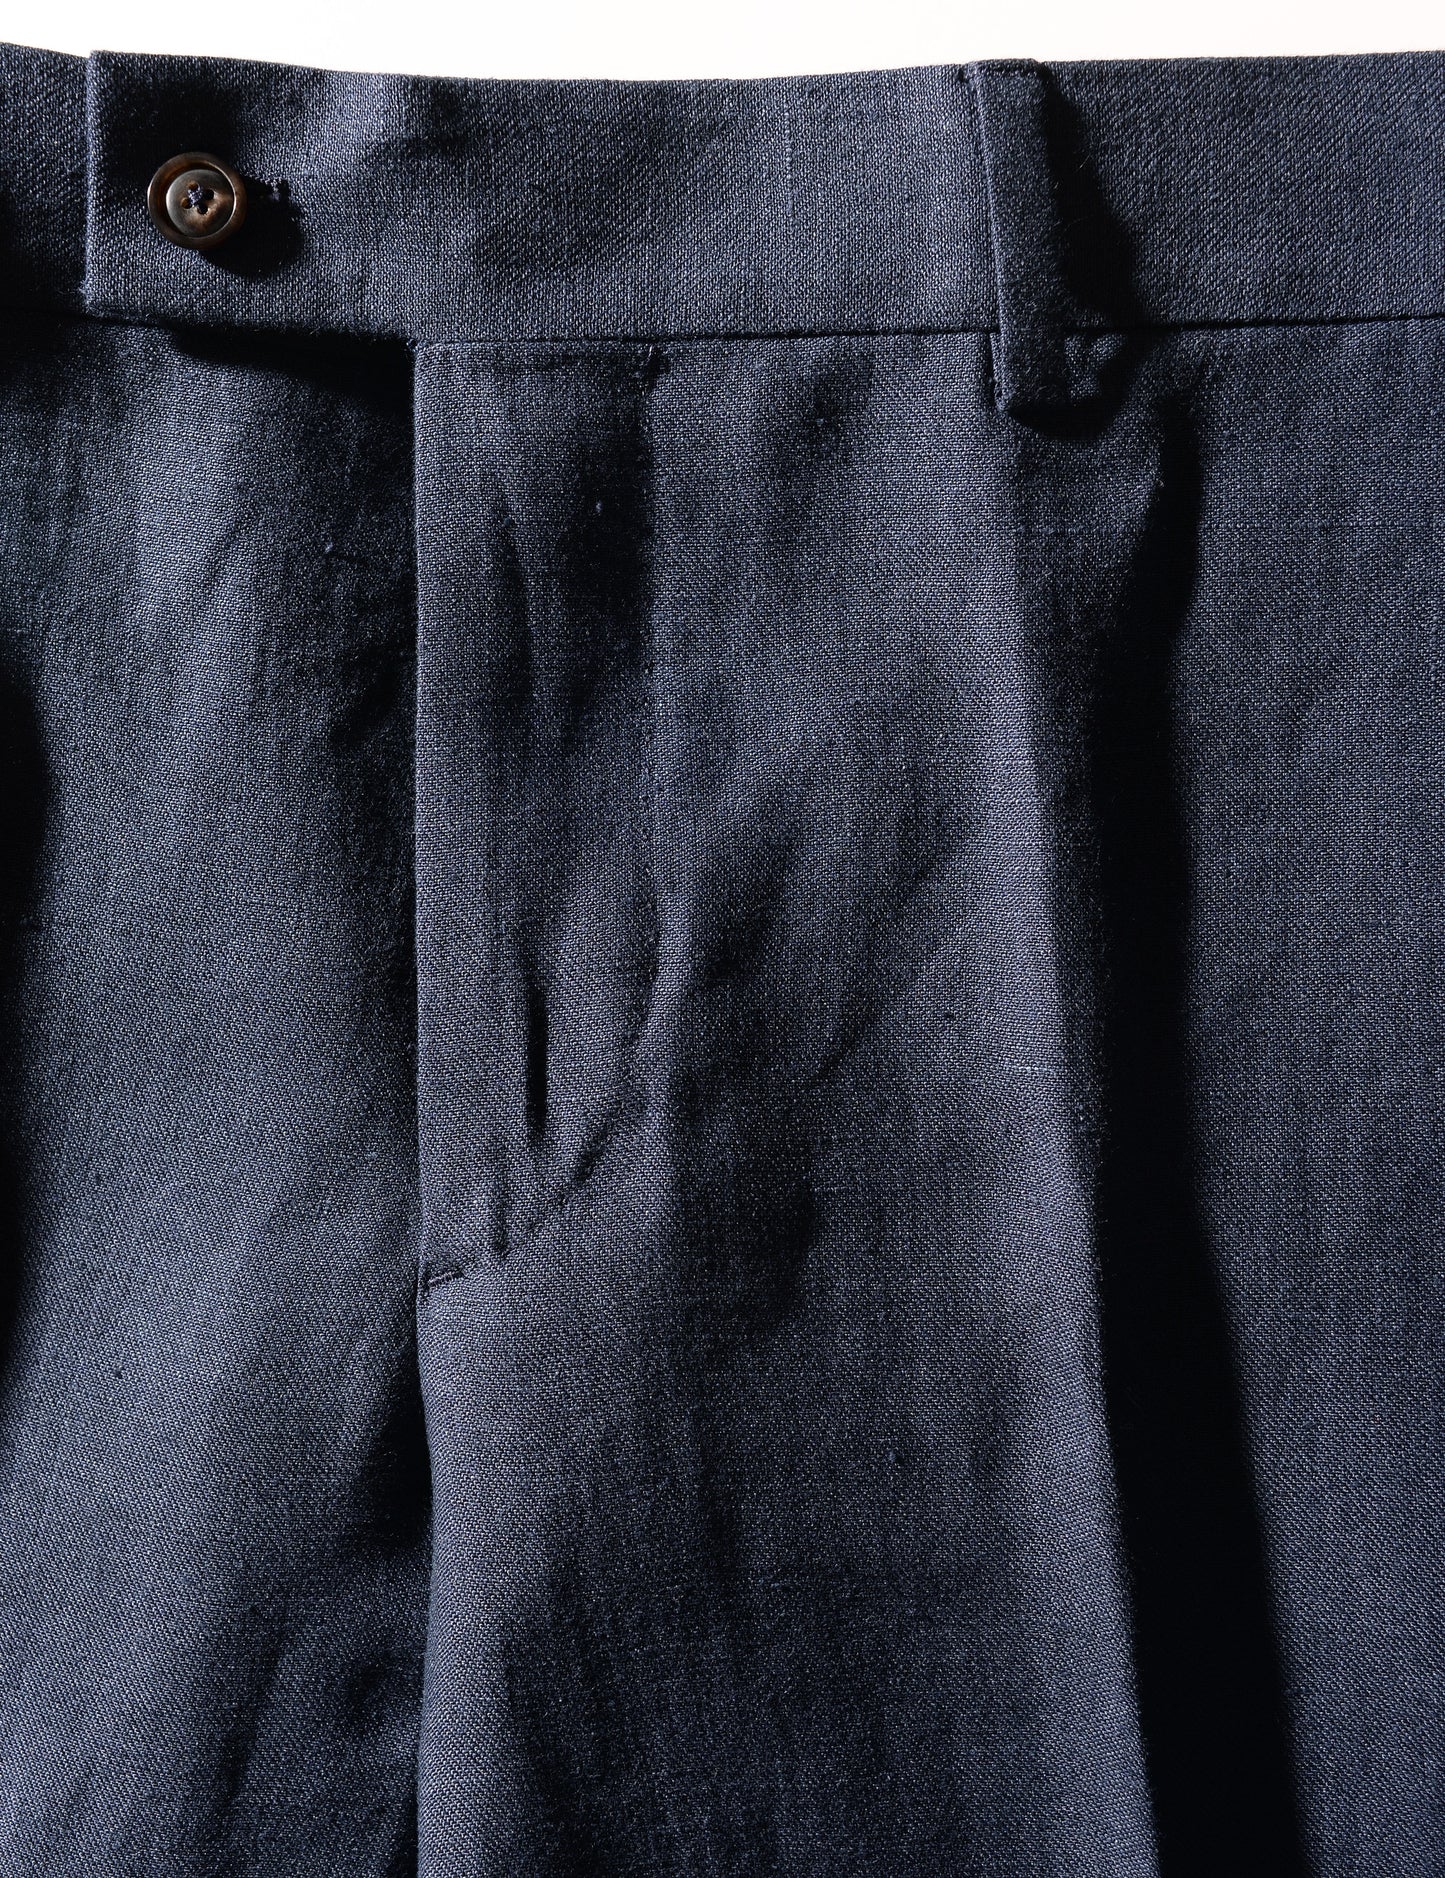 BKT50 Tailored Trousers in Linen Twill - Salerno Blue